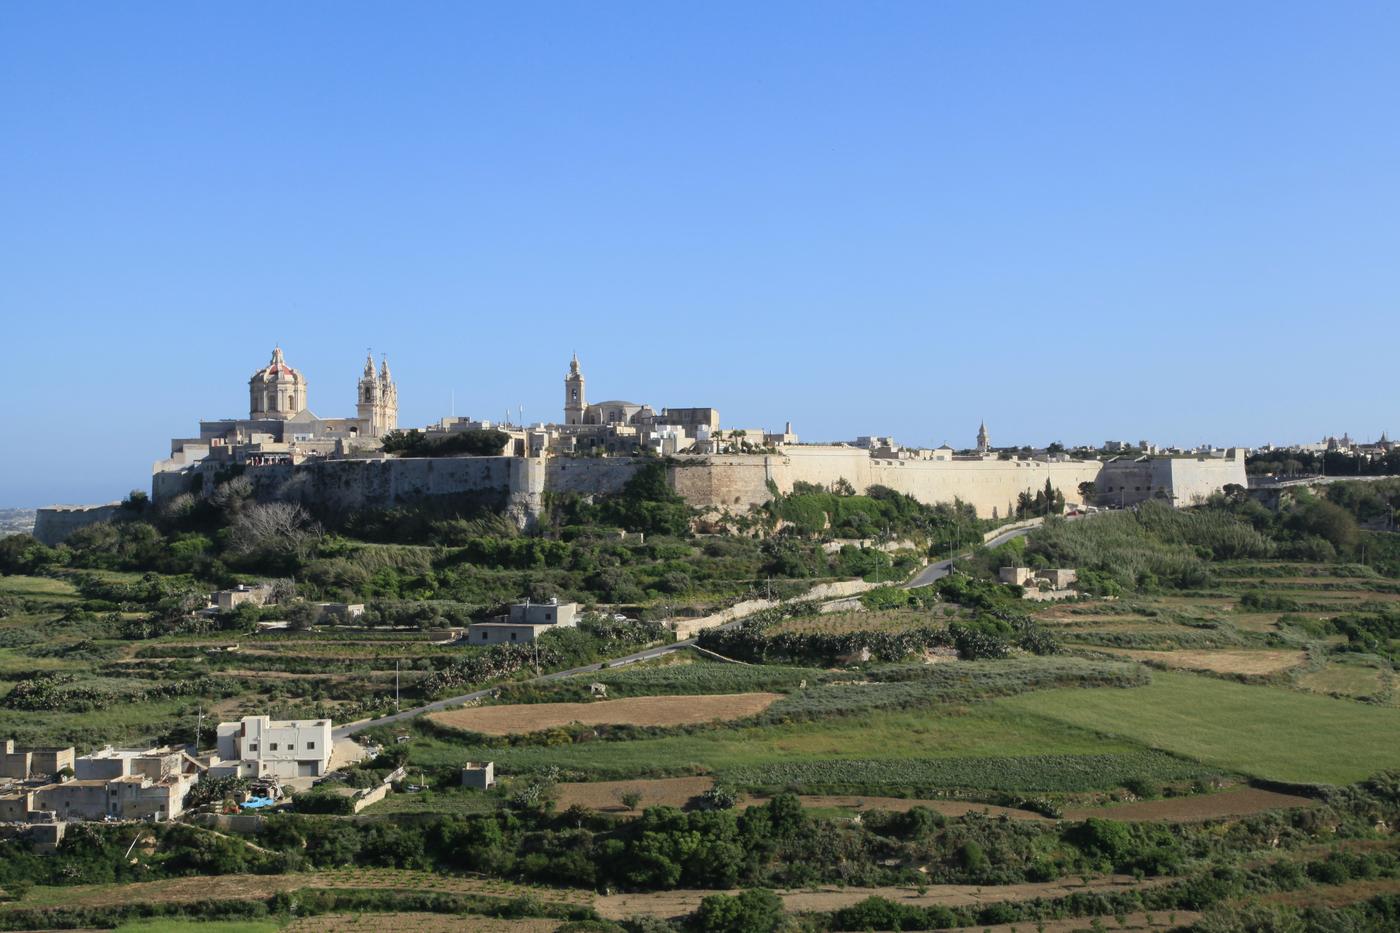 Mdina: Time Travel to the Middle Ages